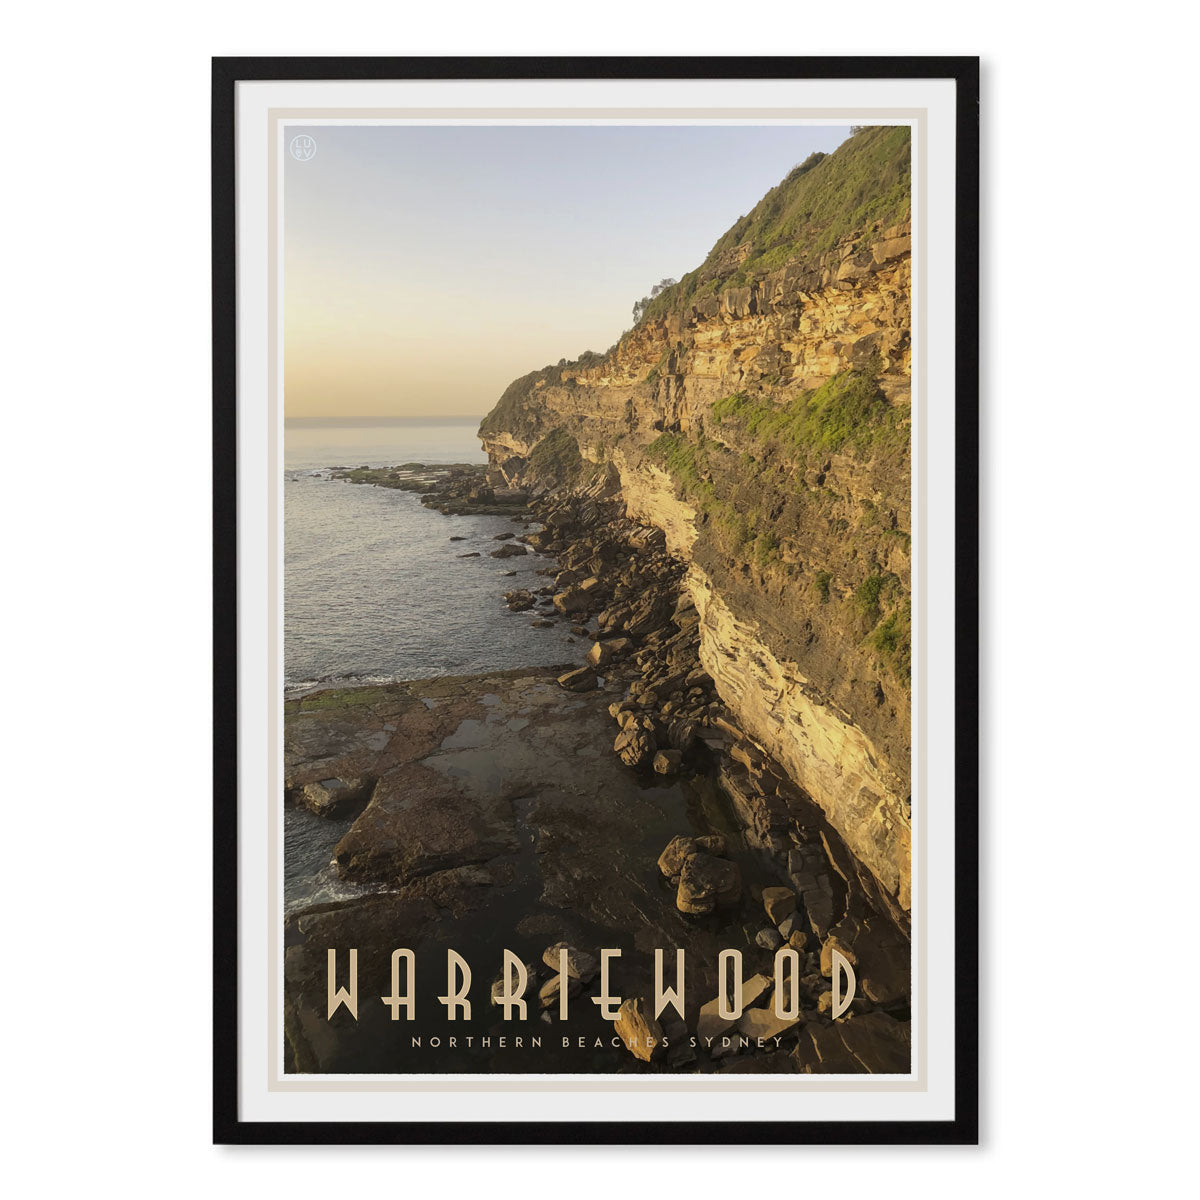 Warriewood vintage travel style framed print designed by places we luv